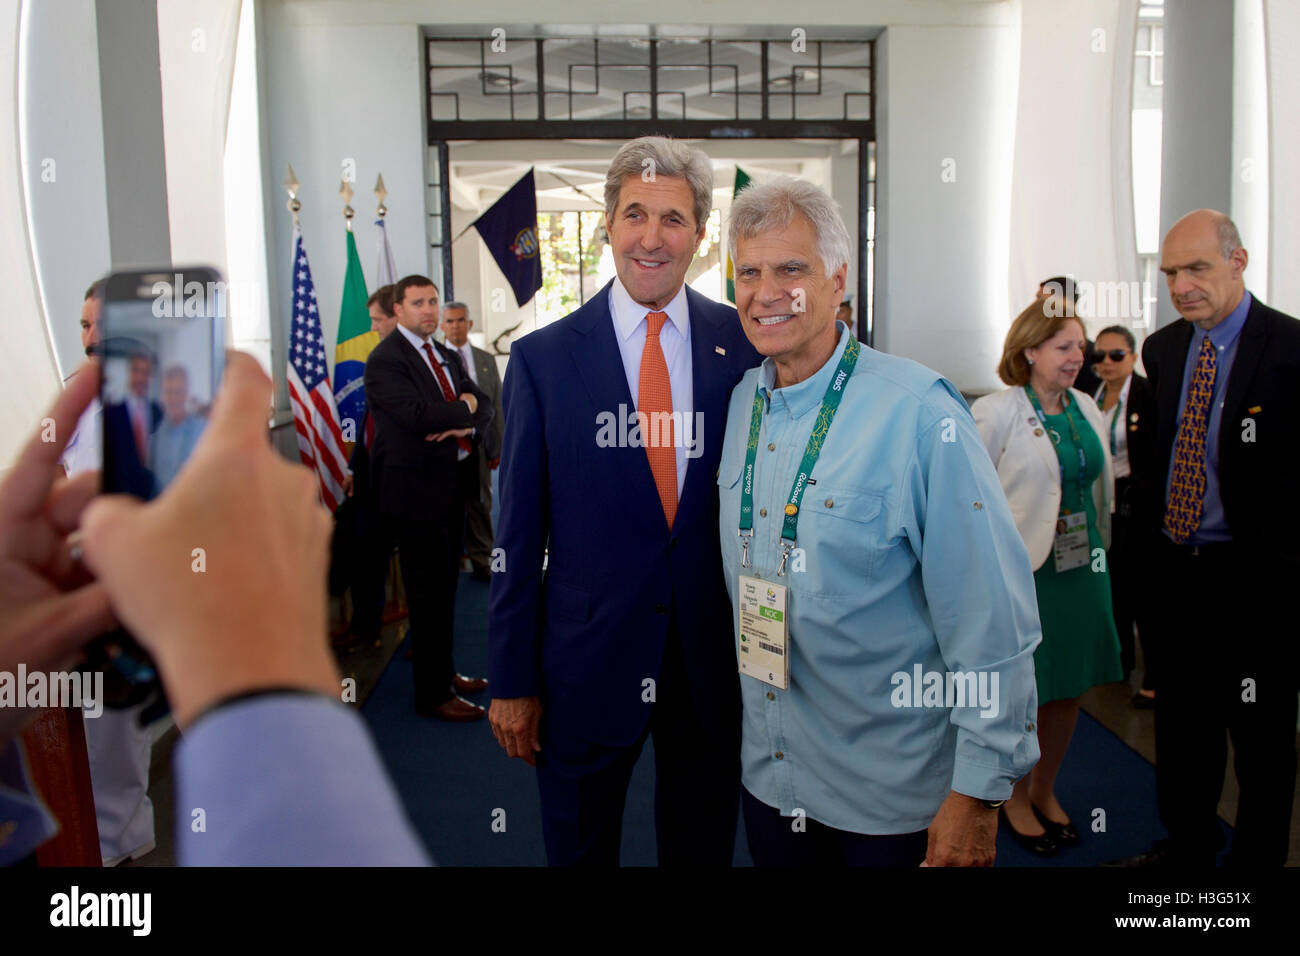 U.S. Secretary of State John Kerry poses for a cellphone photo with Mark Spitz - Olympic gold medalist and fellow U.S. Presidential Delegation member - as they visit the Brazilian Naval Academy in Rio de Janiero, Brazil, on August 5, 2016, before they meet members of Team USA training at the facility. Stock Photo